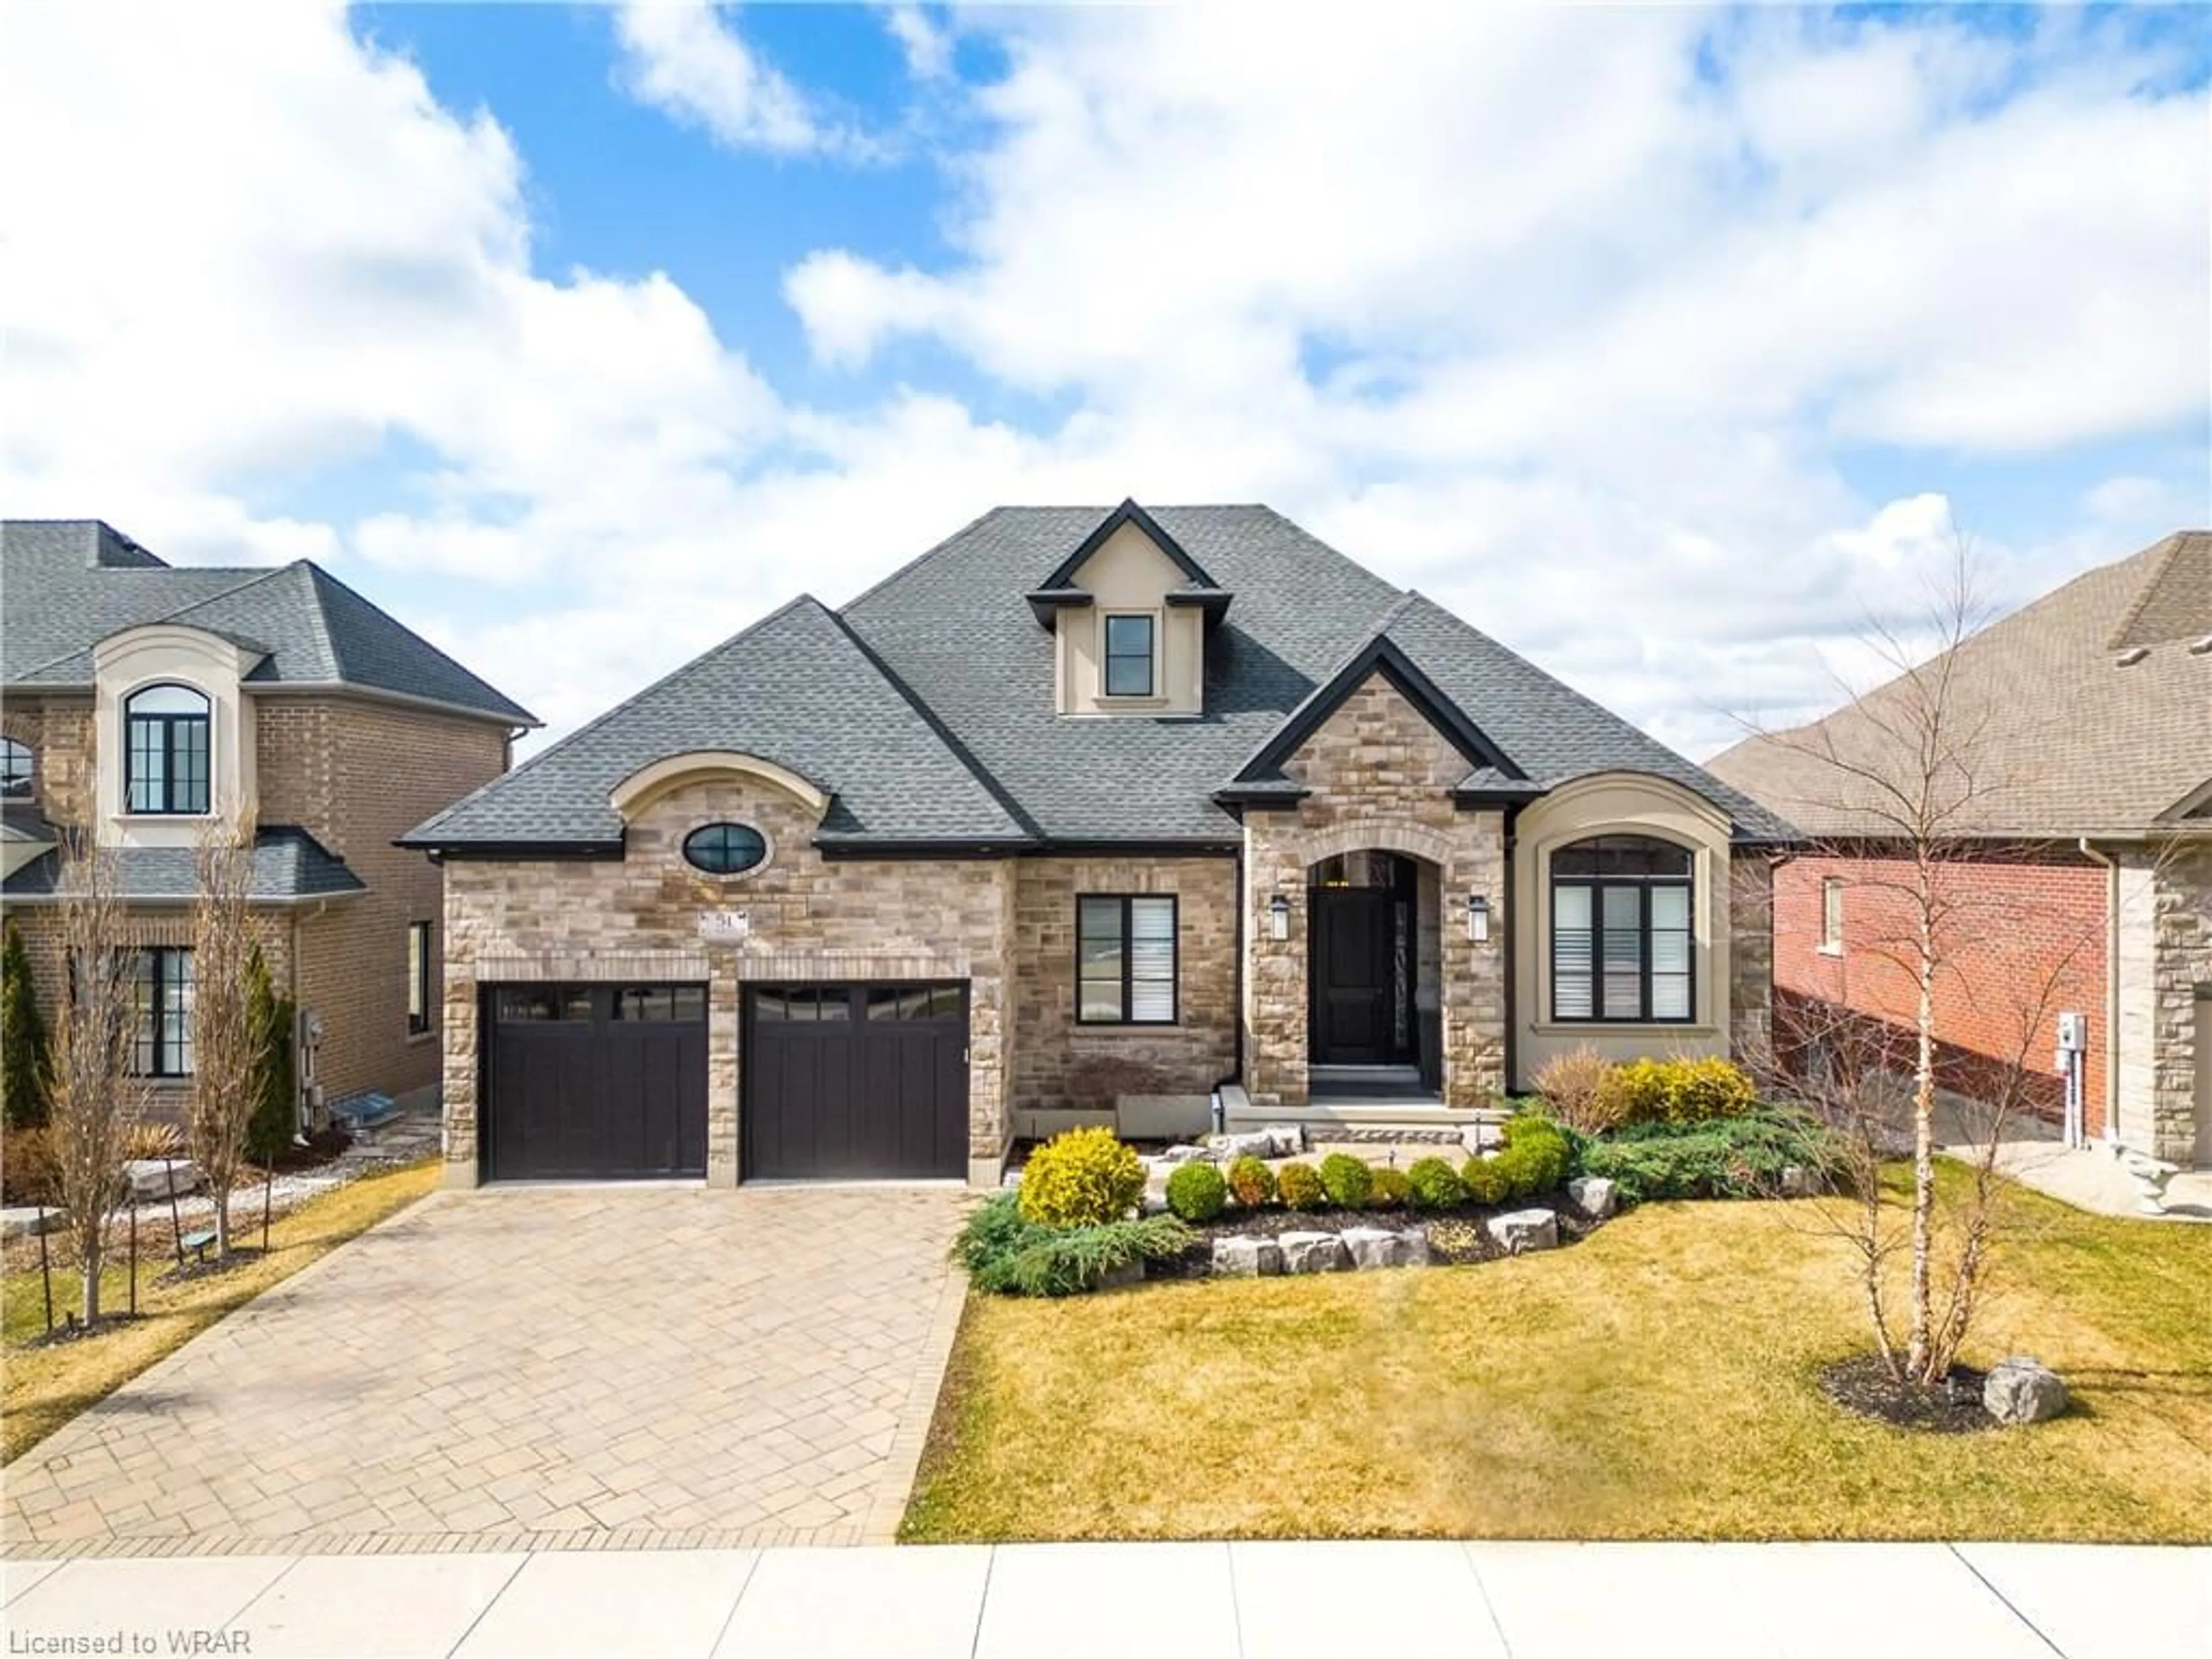 Home with brick exterior material for 51 Fall Harvest Drive, Kitchener Ontario N2P 0G6